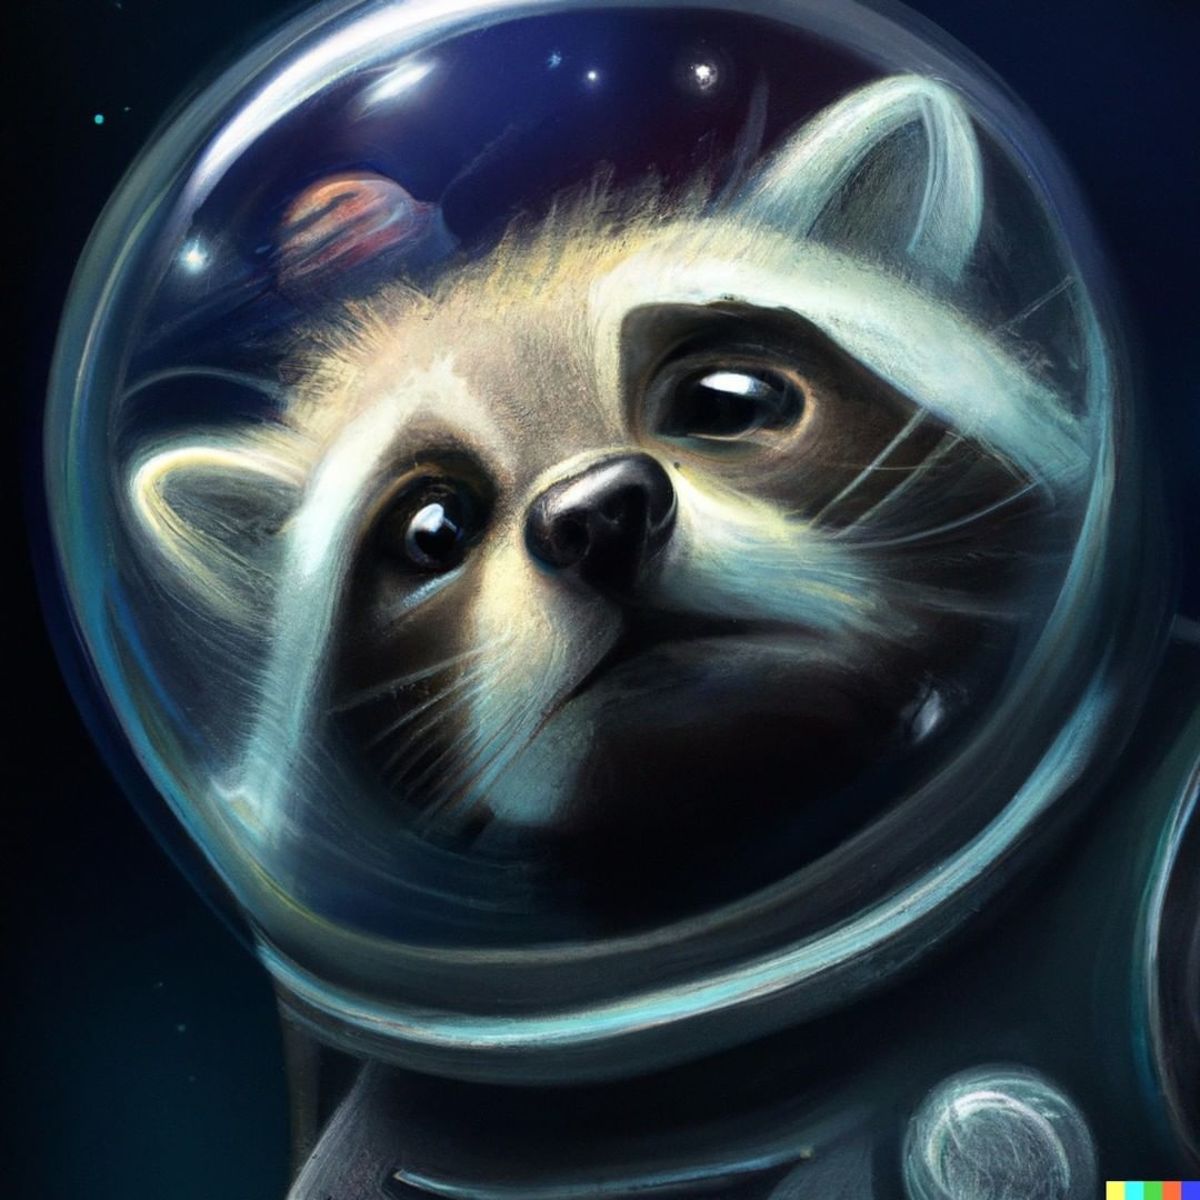 A raccoon astronaut with the cosmos reflecting on the glass of his helmet dreaming of the stars, digital art (Actual text prompt used)